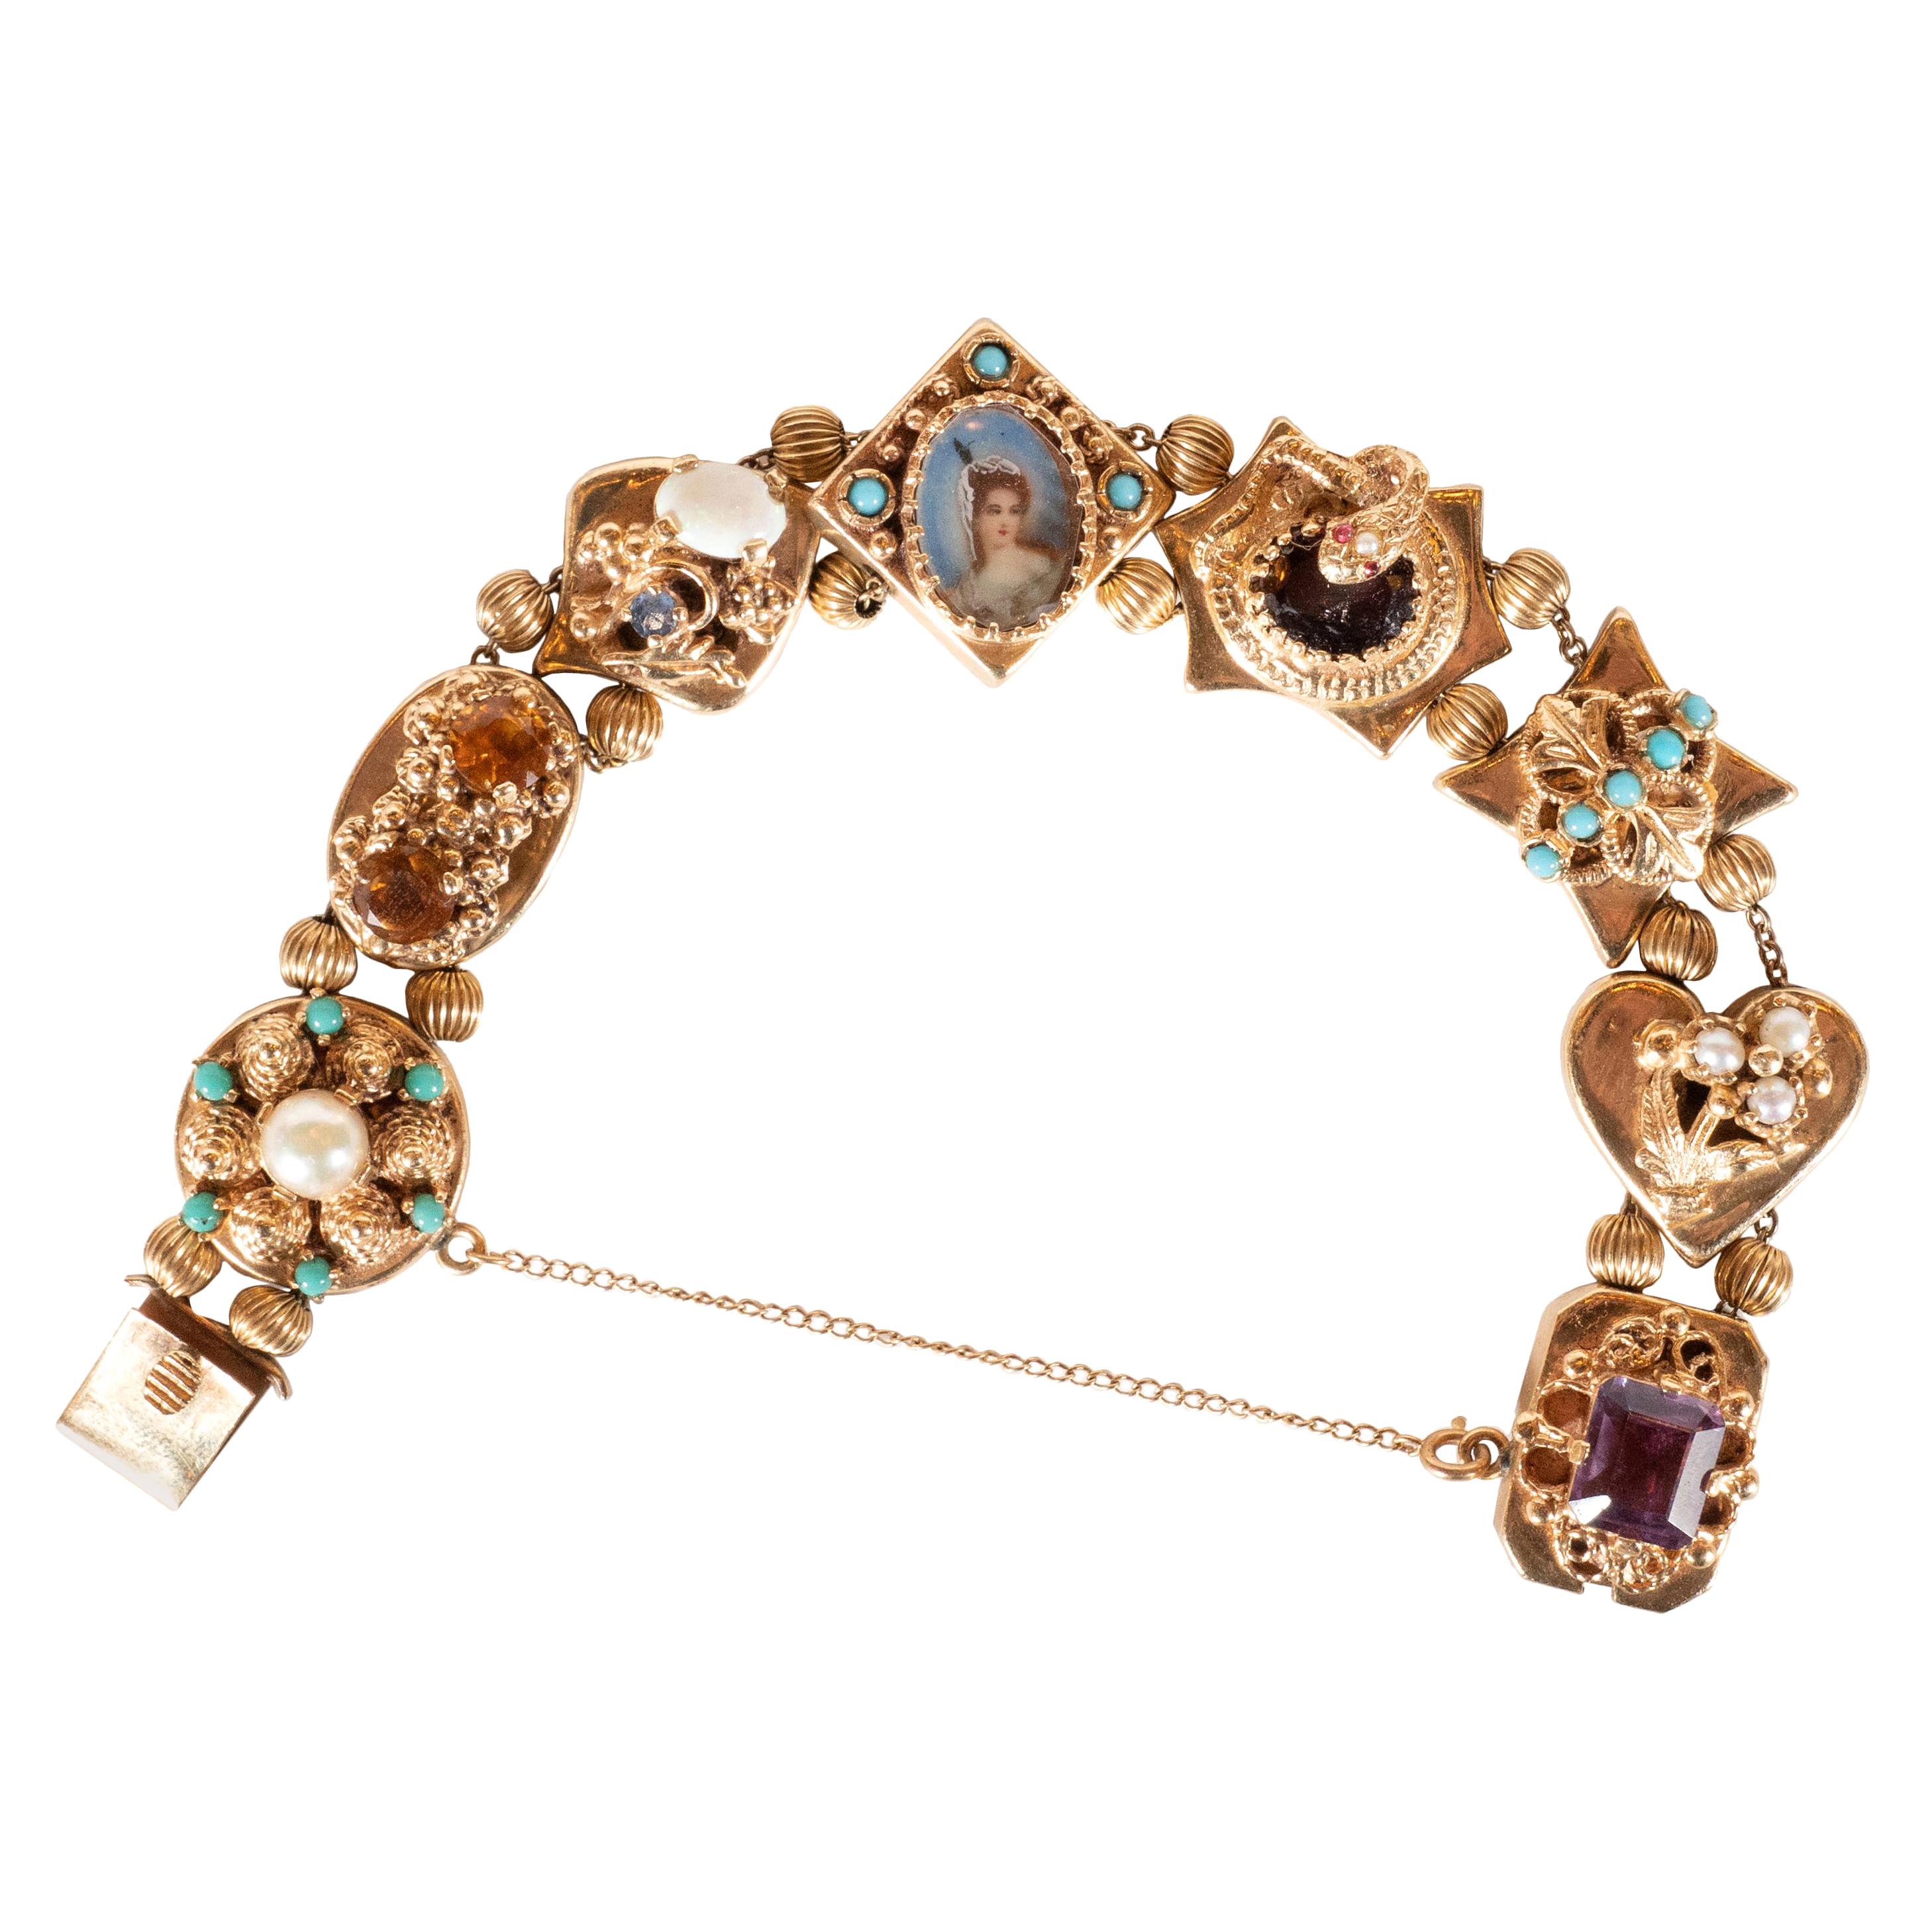 1940s Gold Slide Bracelet with Citrine, Sapphire, Rubies, Garnets and Pearls